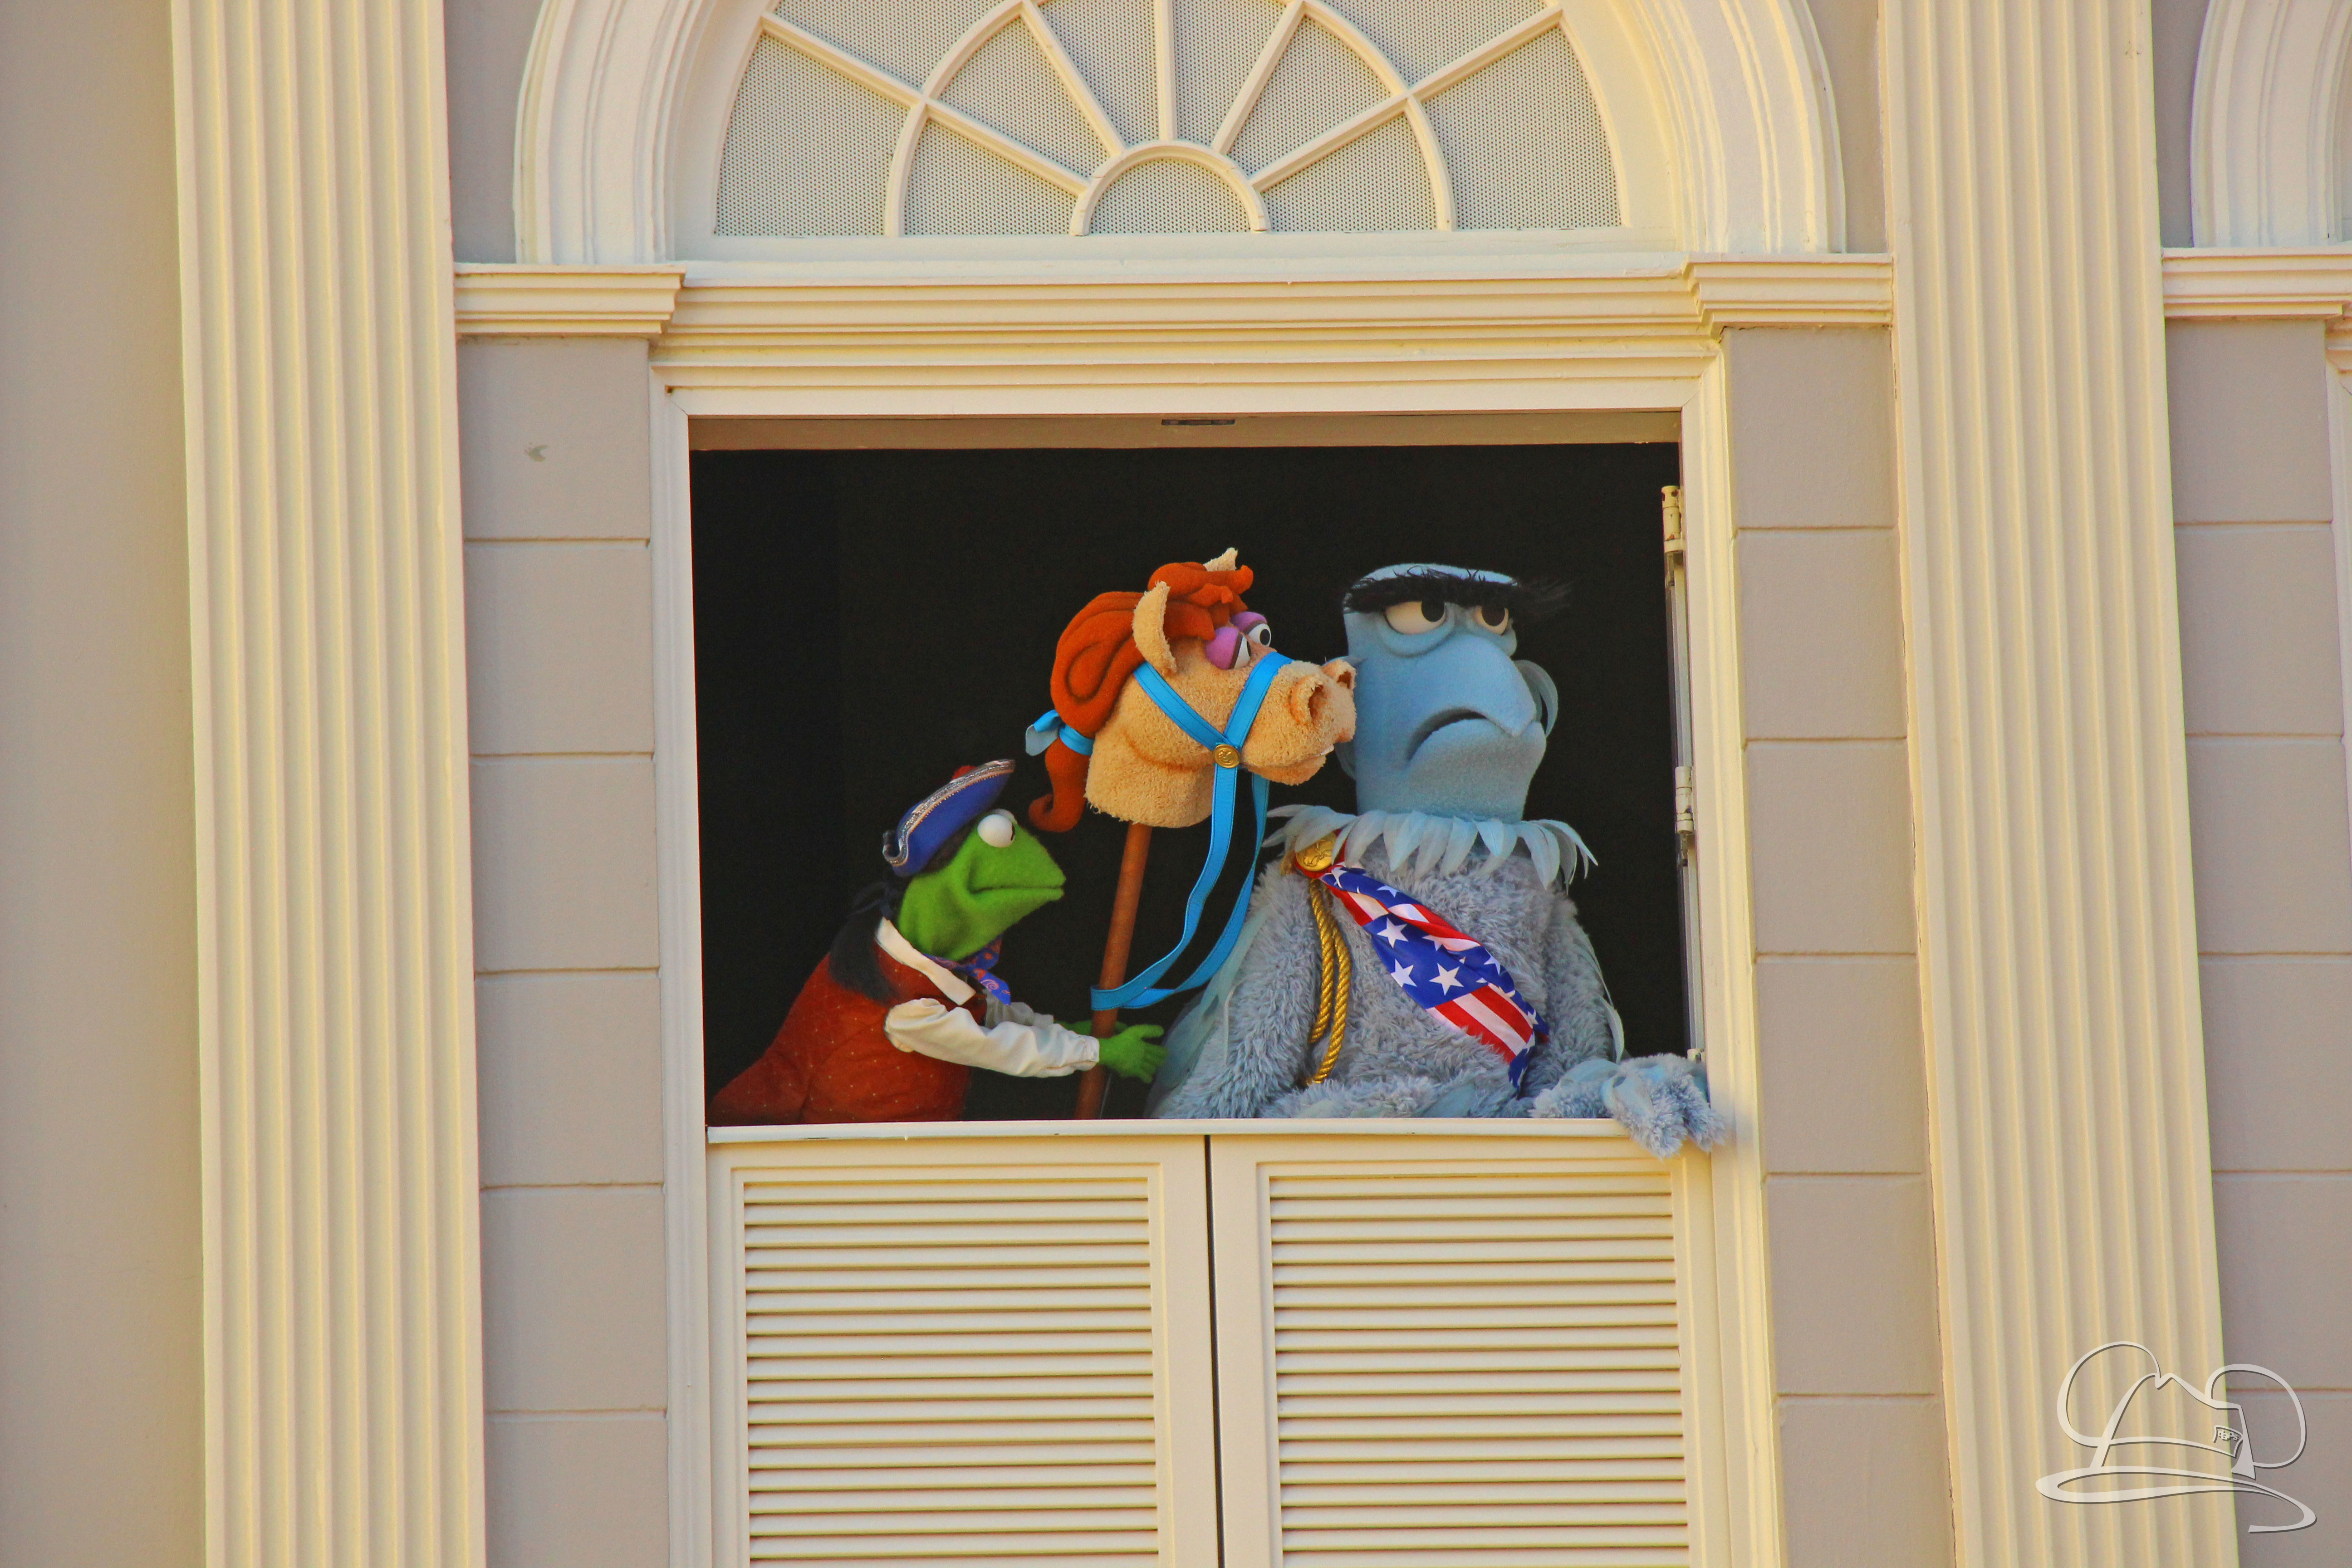 The Muppets are Magical at Magic Kingdom!